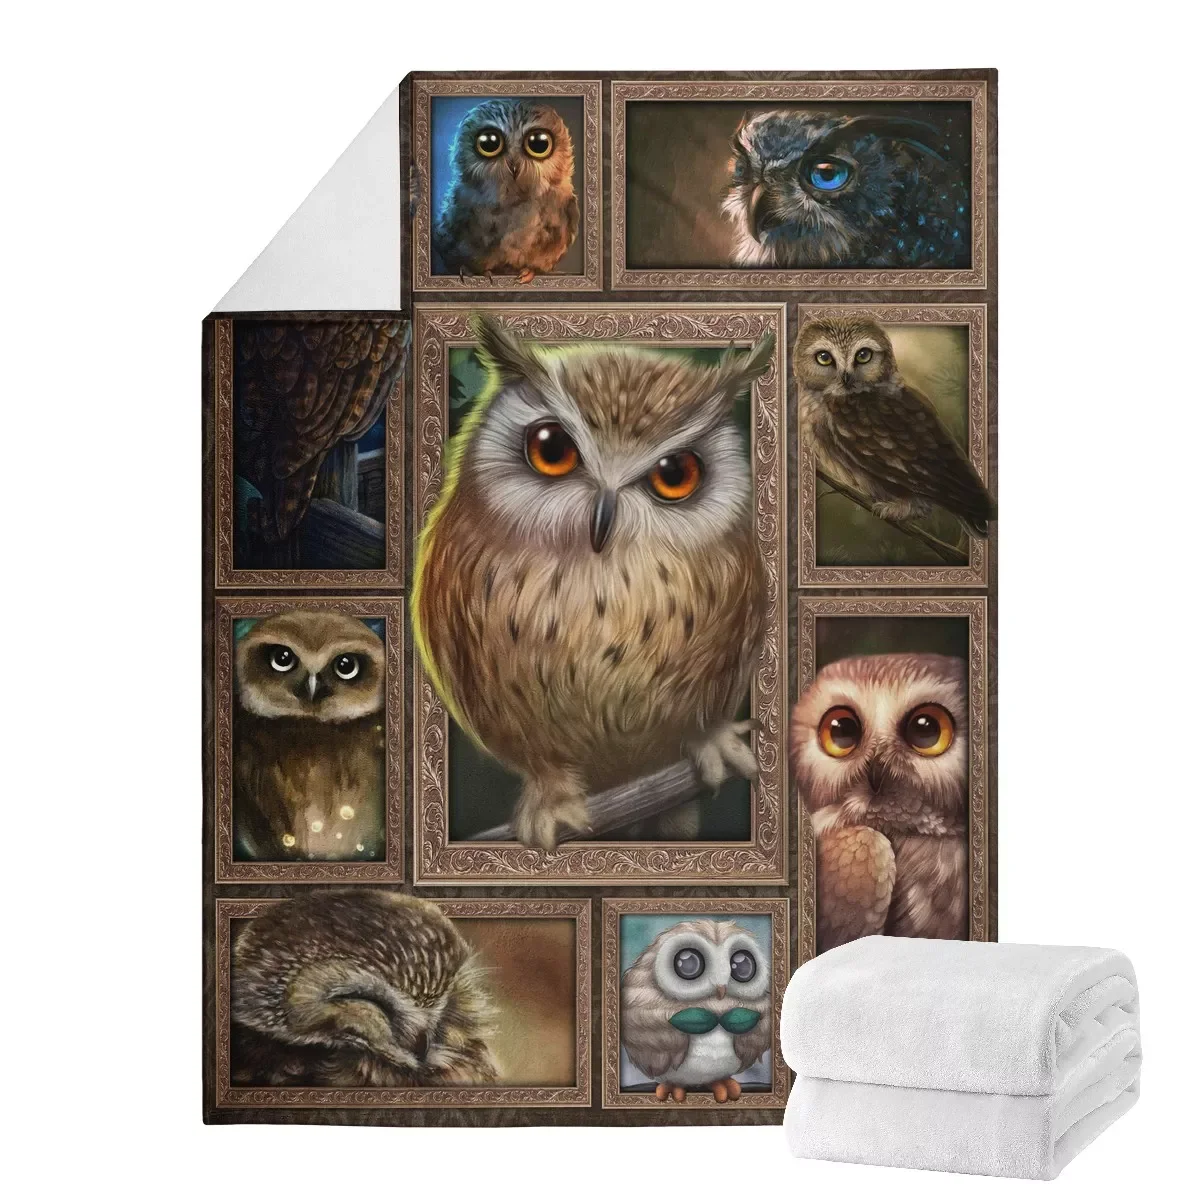 TOADDMOS Funny Owl Splicing Design Fleece Blankets Microfiber Bedroom Living Room Thin Cover Quilt Sofa/Bed Comfort Soft Sherpa